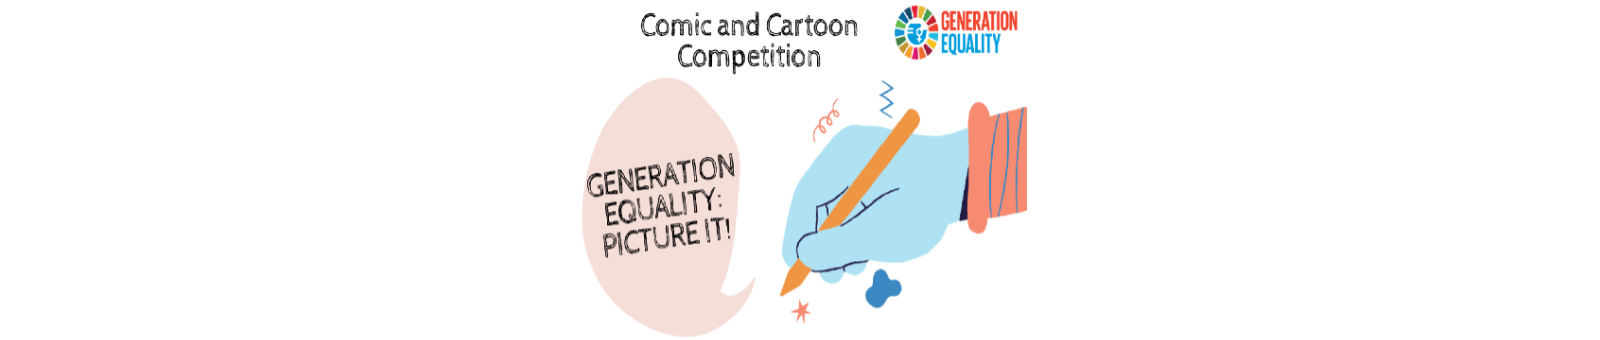 Generation Equality: Picture it! UN Women comic and cartoon competition